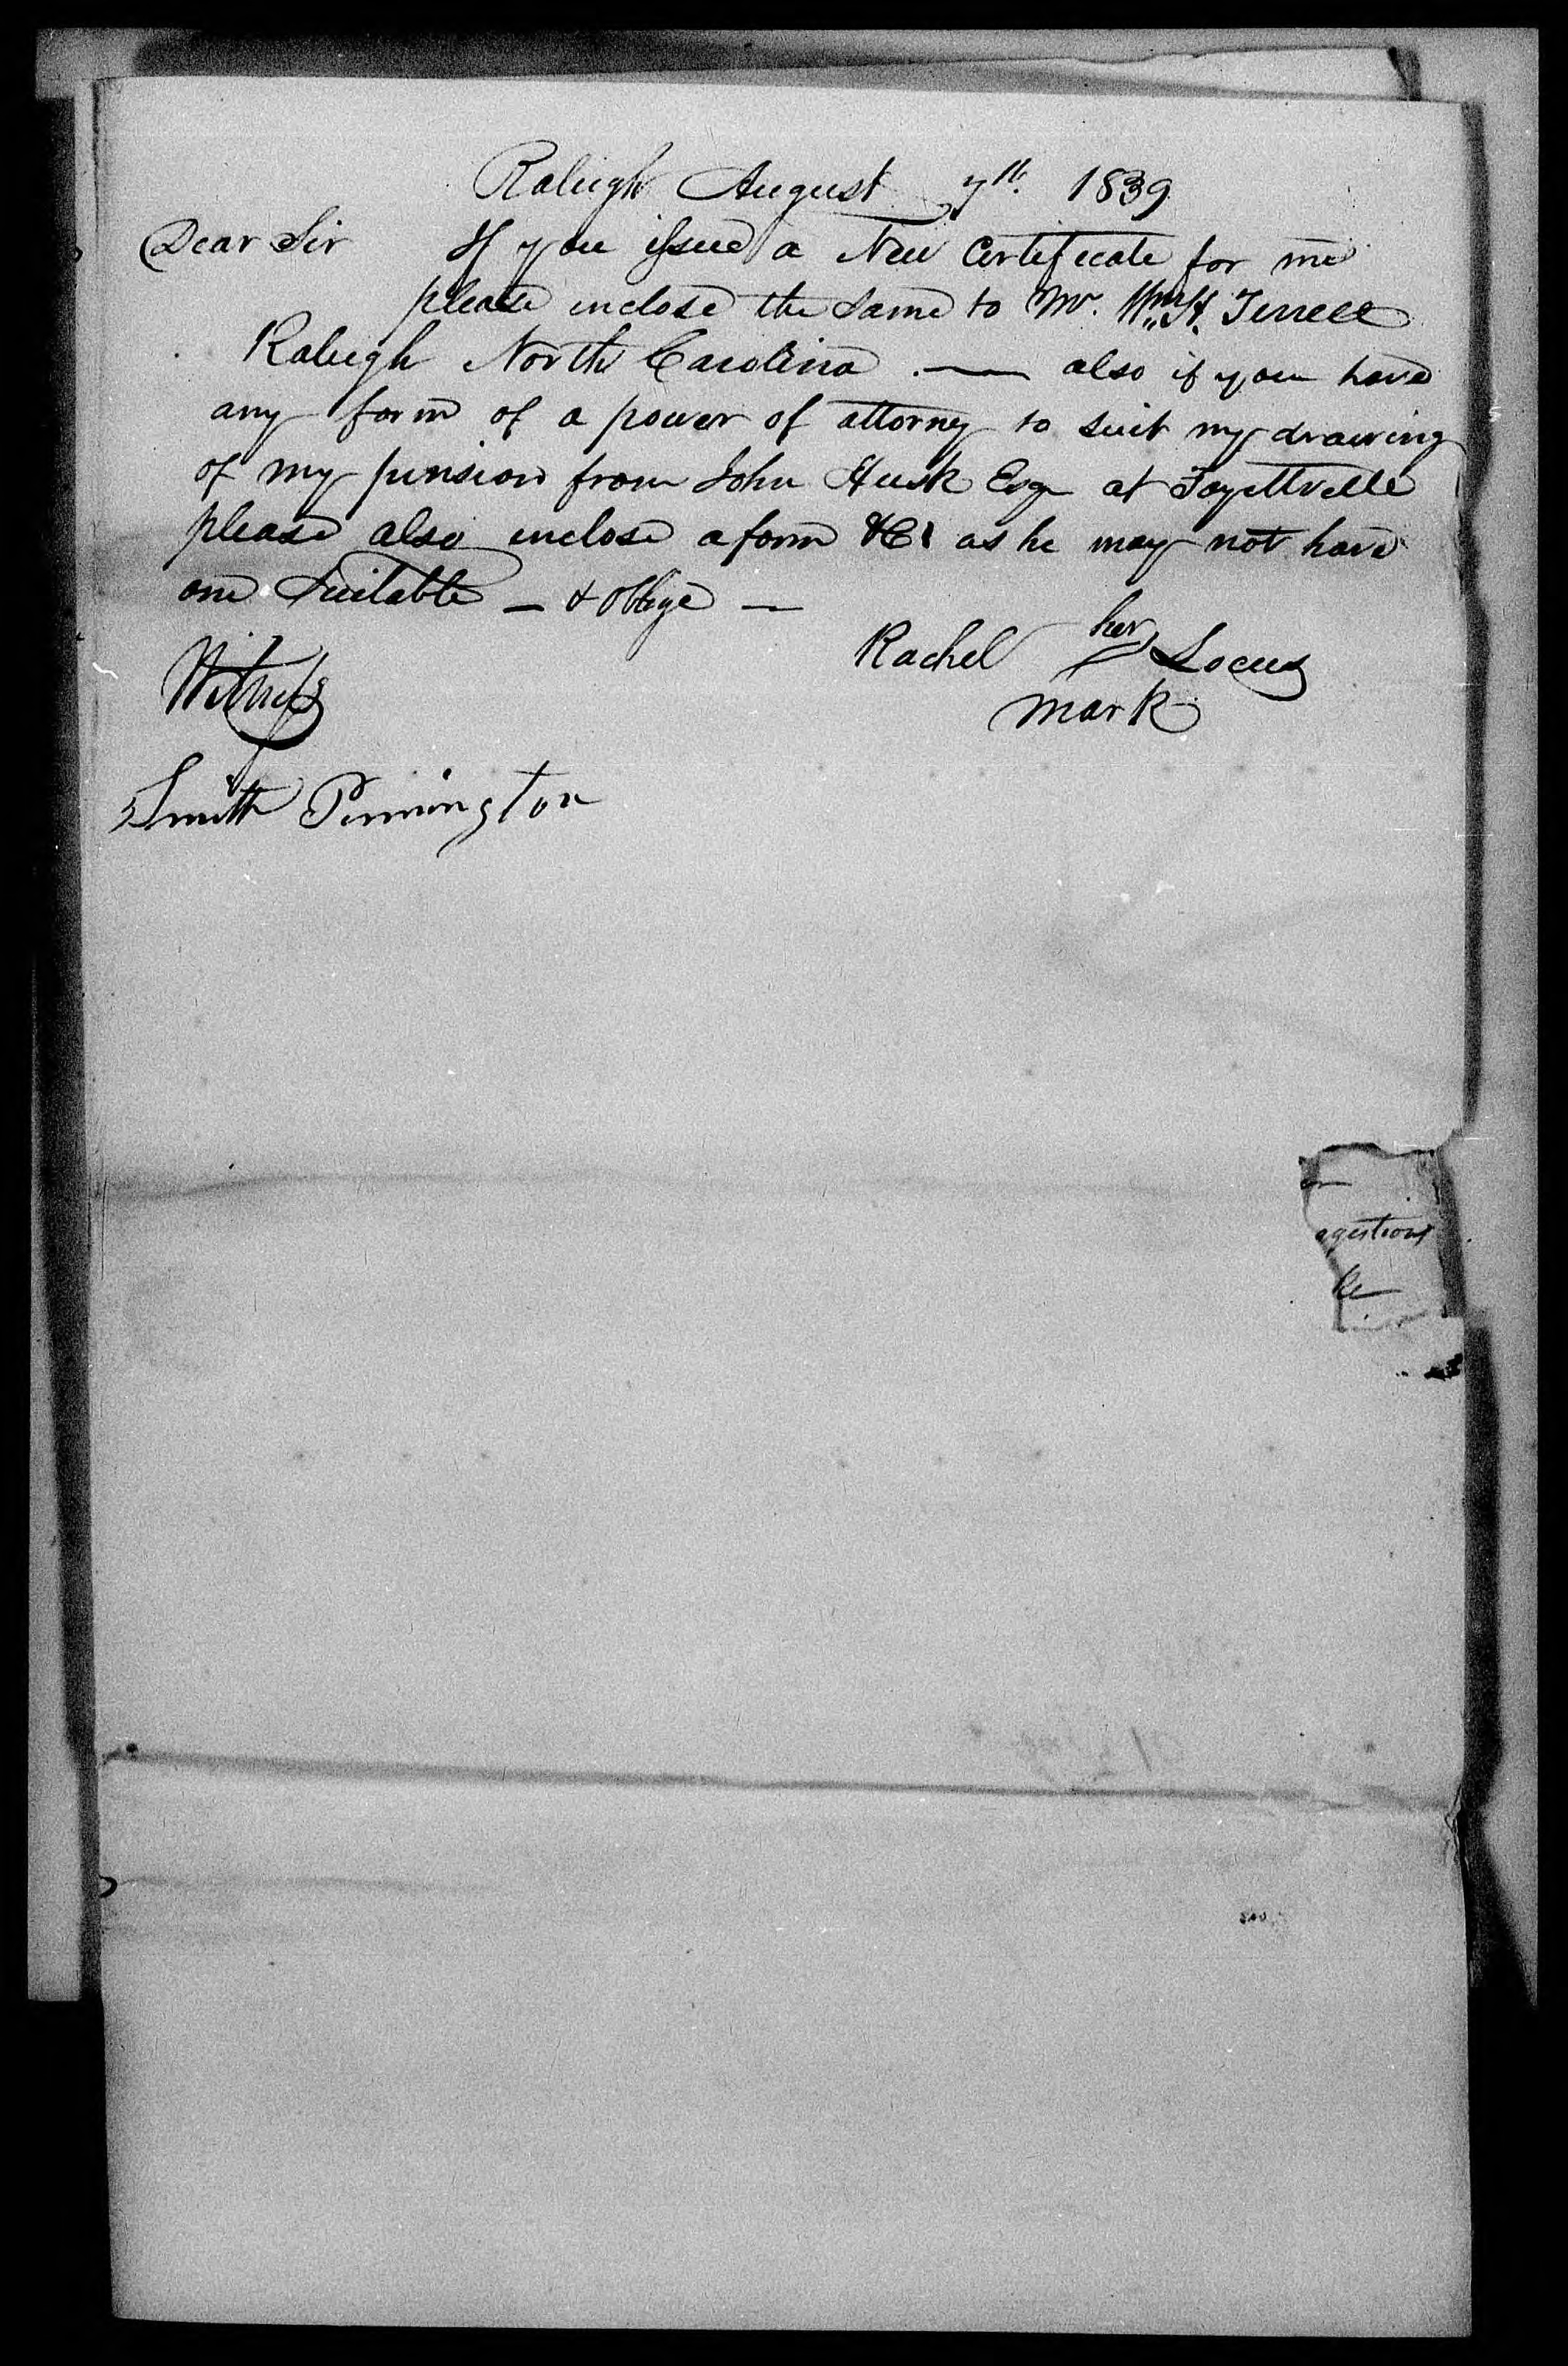 Letter from Rachel Locus to the United States Pension Office, 7 August 1839